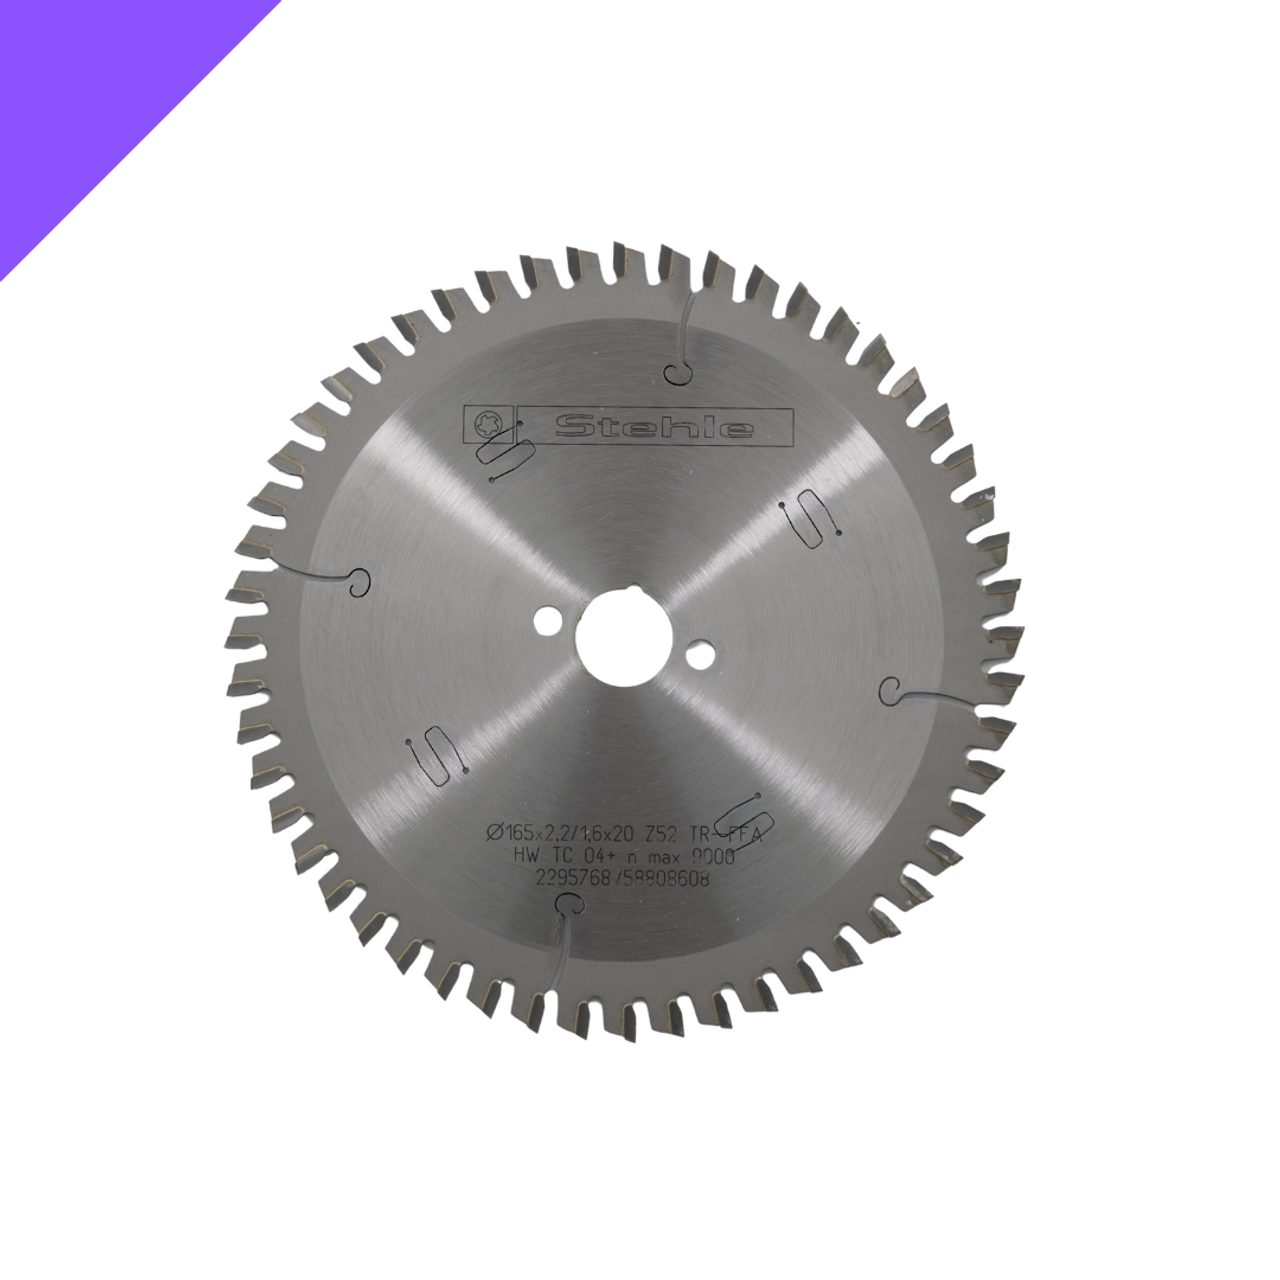 Buy Online STEHLE KKS-HKS ⌀160 x 20 Saw Blade for Hard Plastics with TR-F-FA Negative Hook for the Joinery Industry and Operators in Perth, Sydney and Brisbane